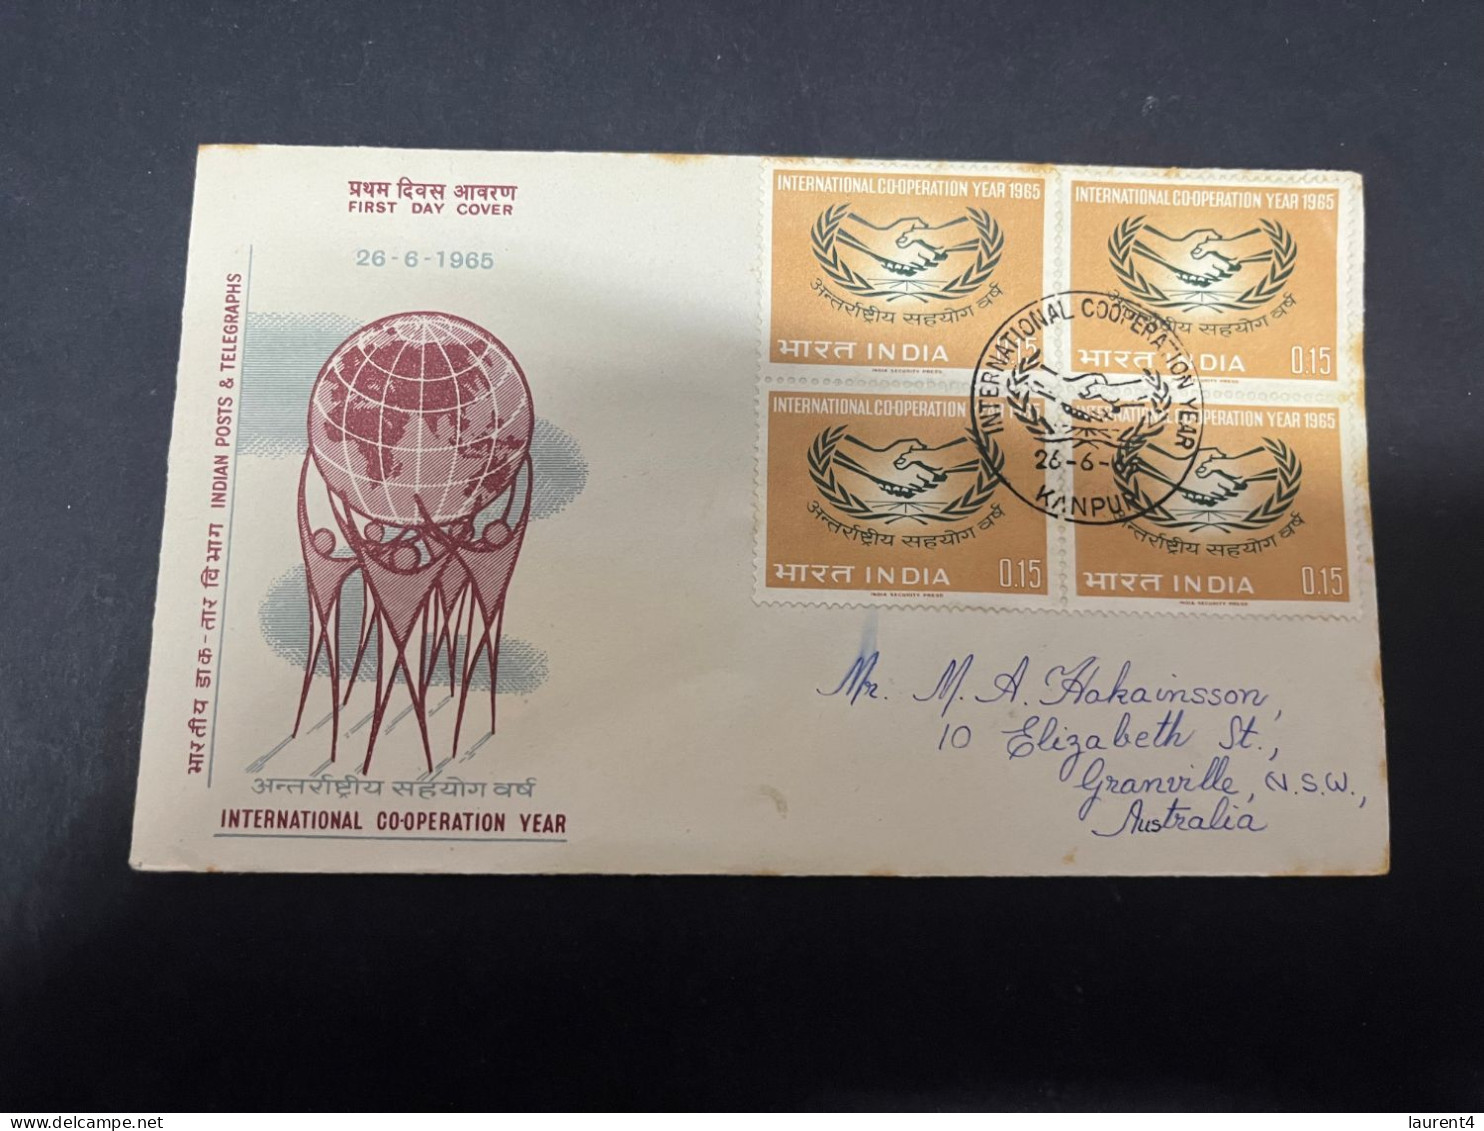 7-5-2024 (4 Z 24) INDIA FDC Cover - 1965 -  International Cooperation Year (bloc Of 4) - FDC